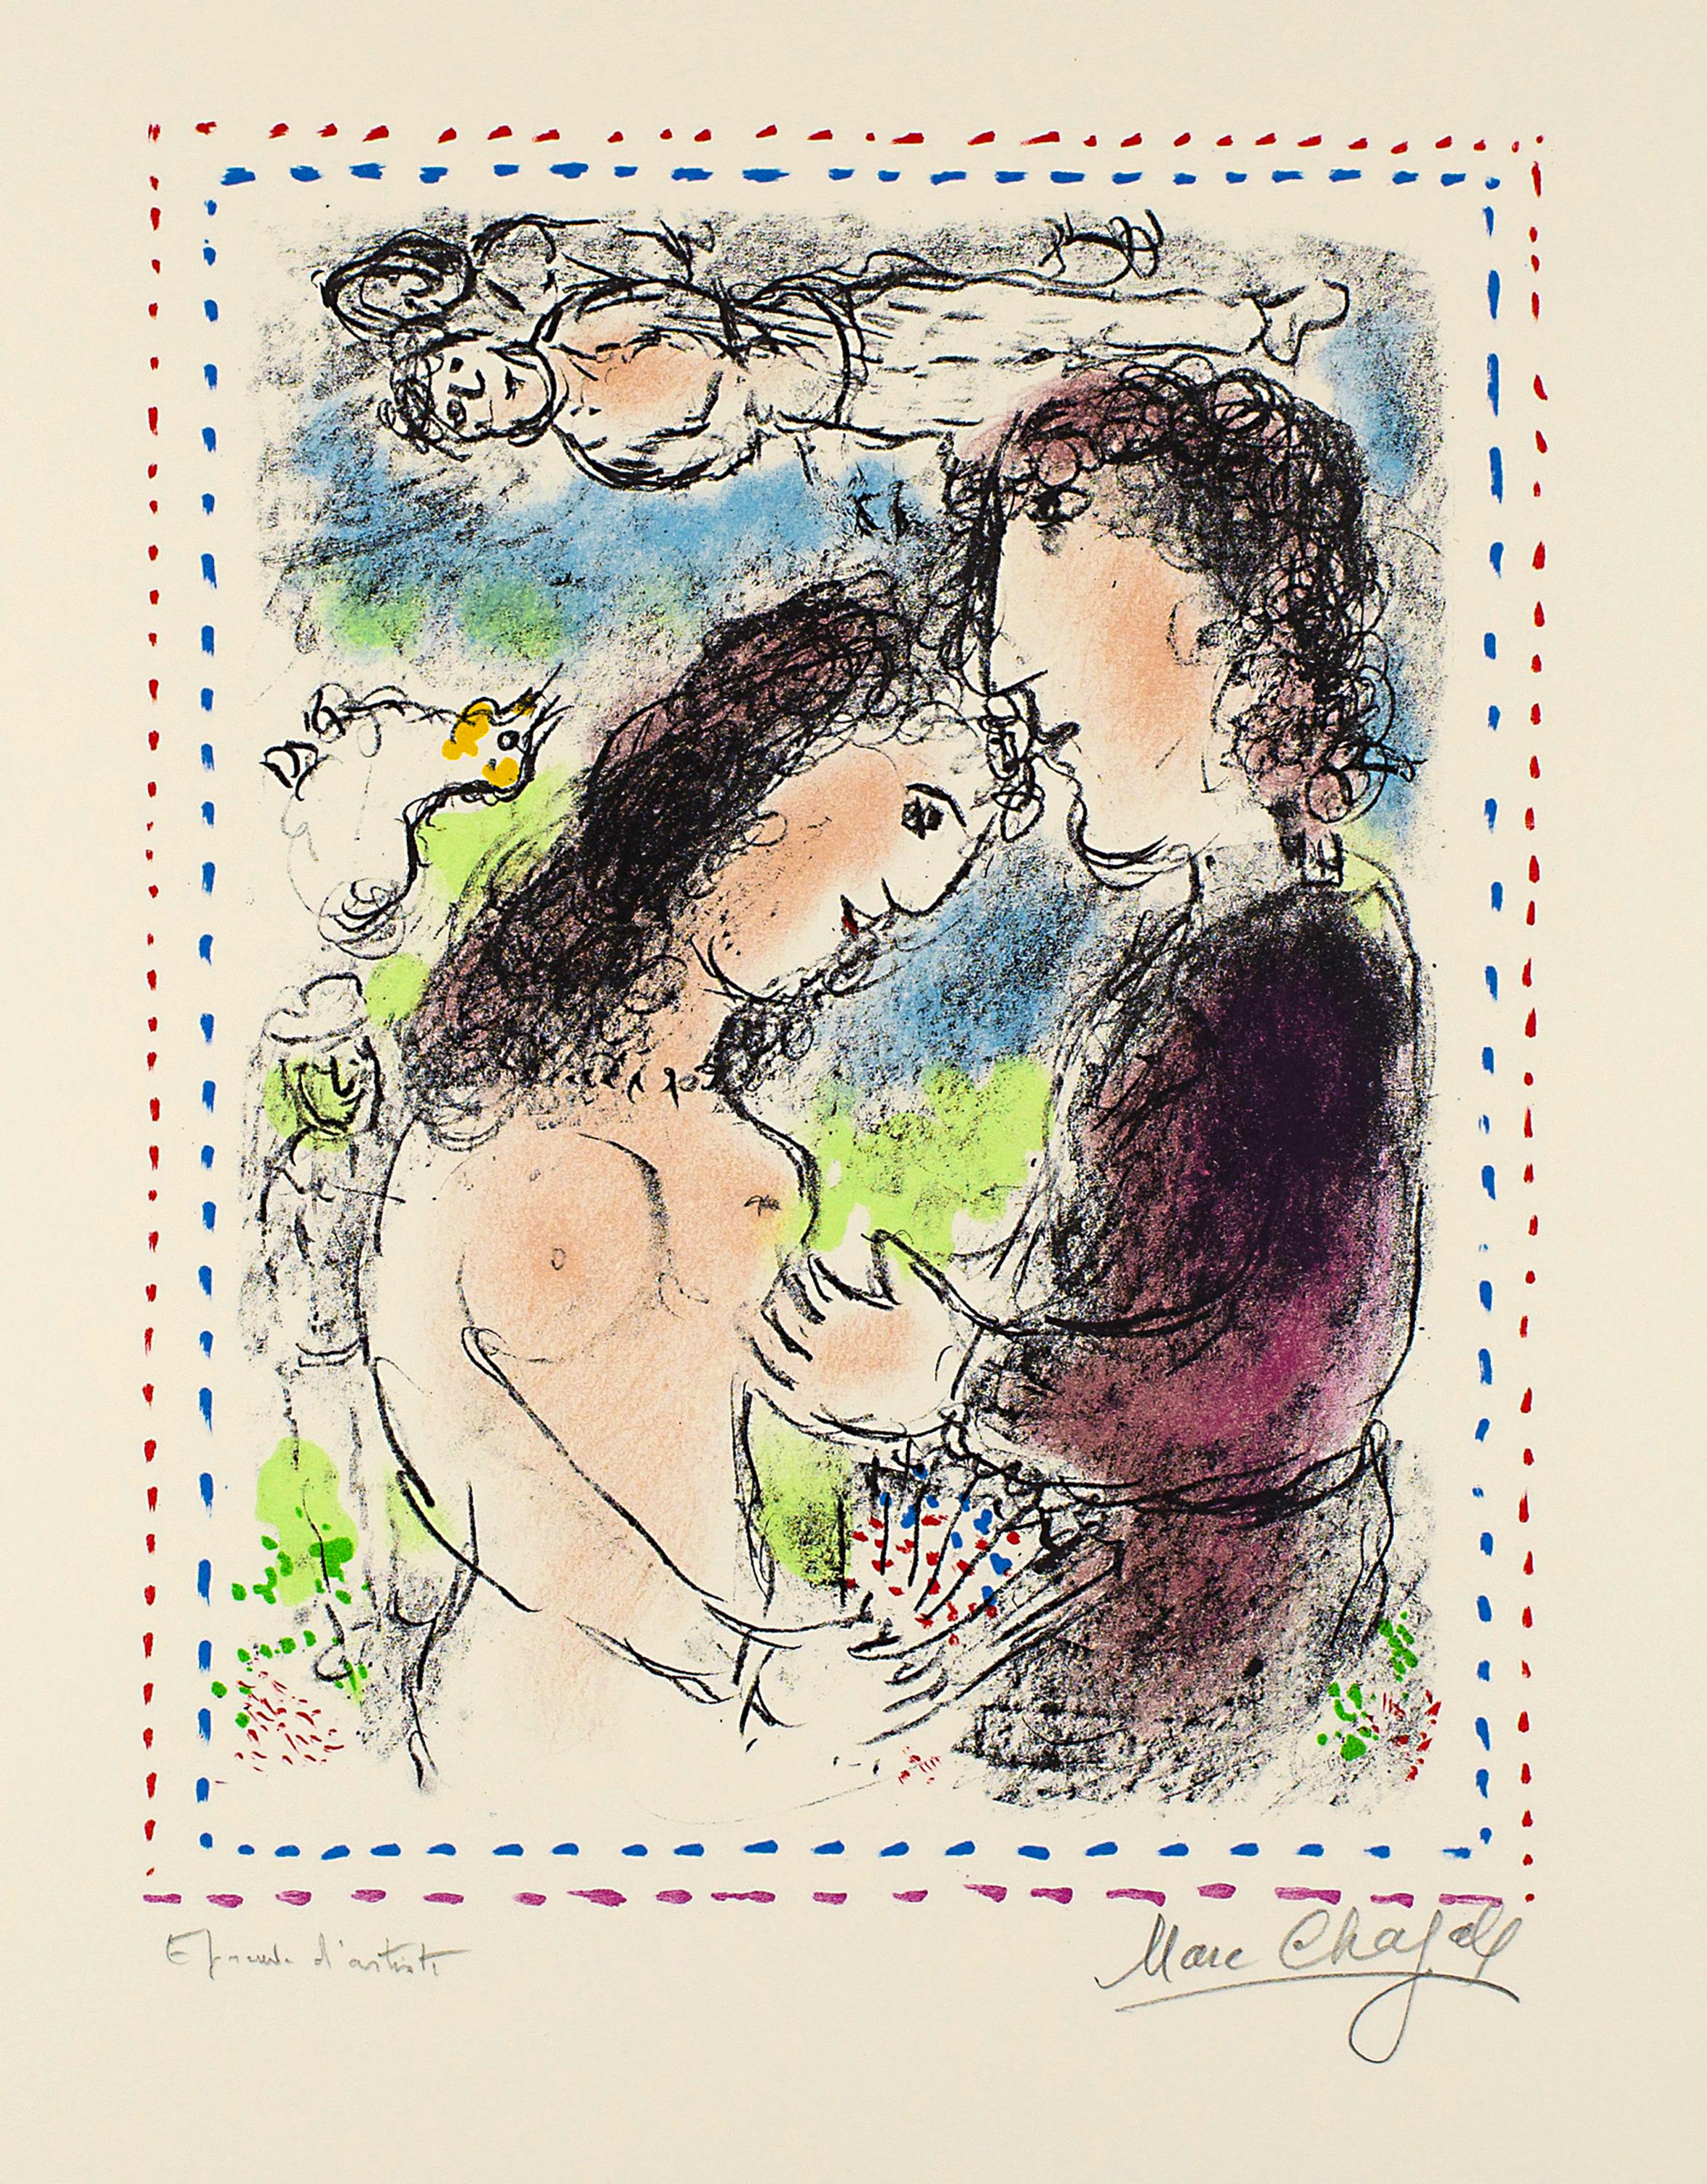 MARC CHAGALL (1887-1985)
“A l’Aube de l’amour”
Farbige Lithographie, November 1983, 
35 x 27 cm, image;54, 5x43 cm, sheet size. 
Signature: Lower right signed by the artist in pencil “ Marc Chagall”, left inscribed “Epreuve d’artiste”. Catalog